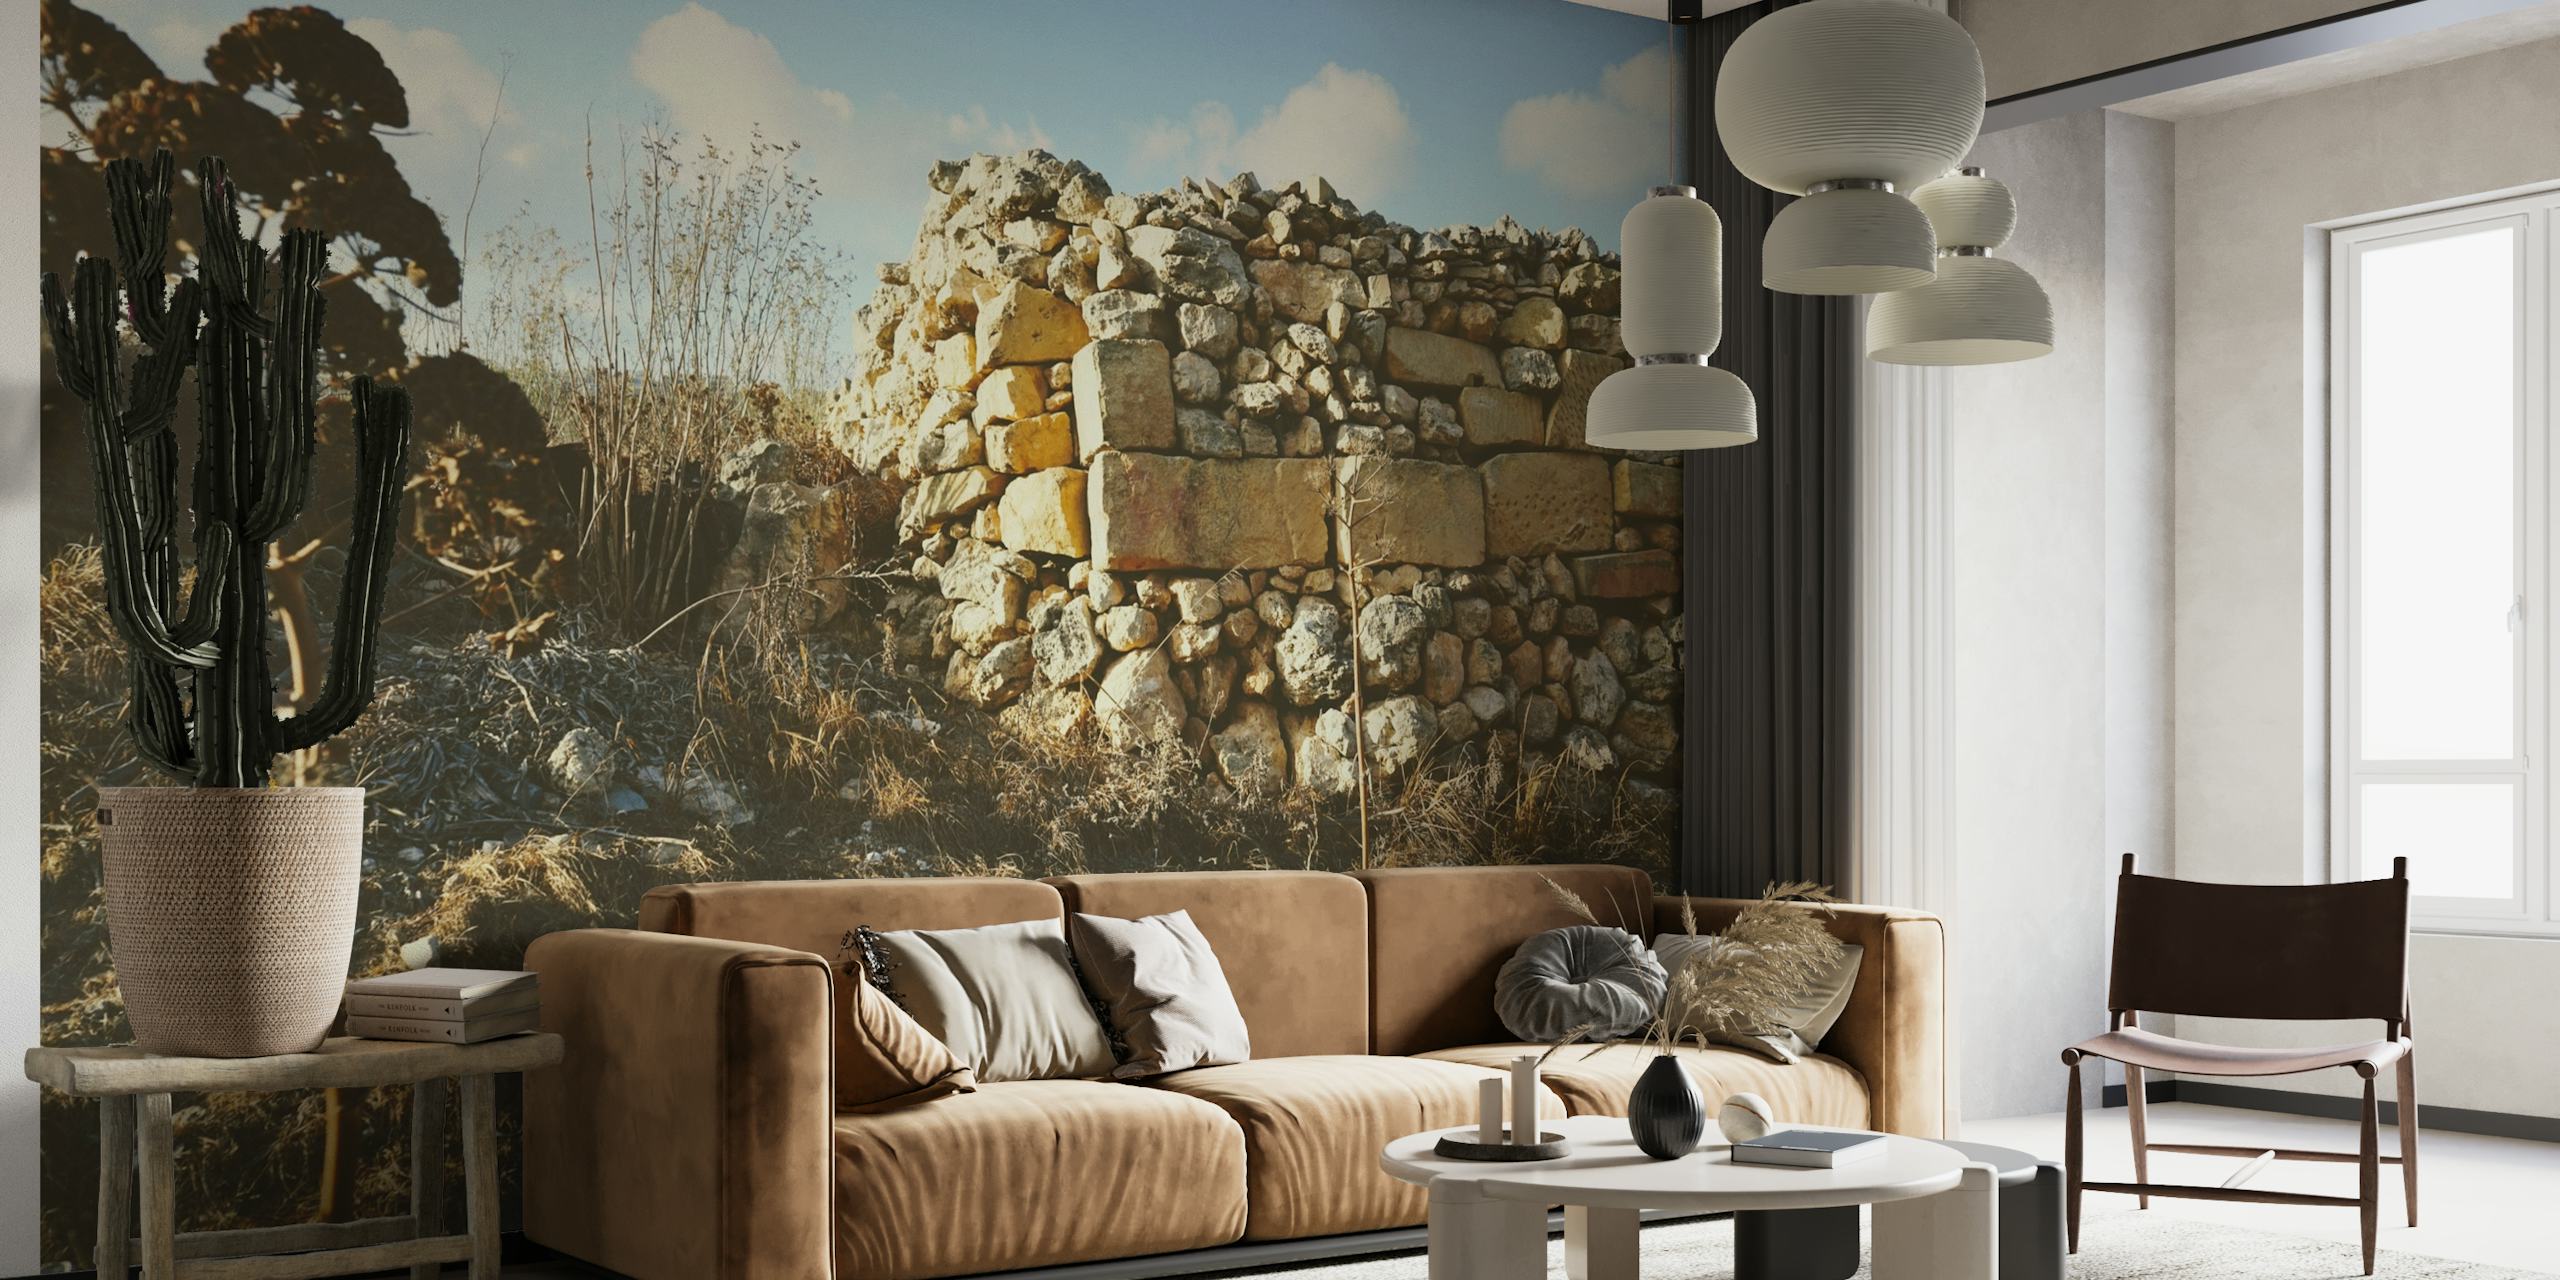 Sunset casting warm light over stone ruins wall mural